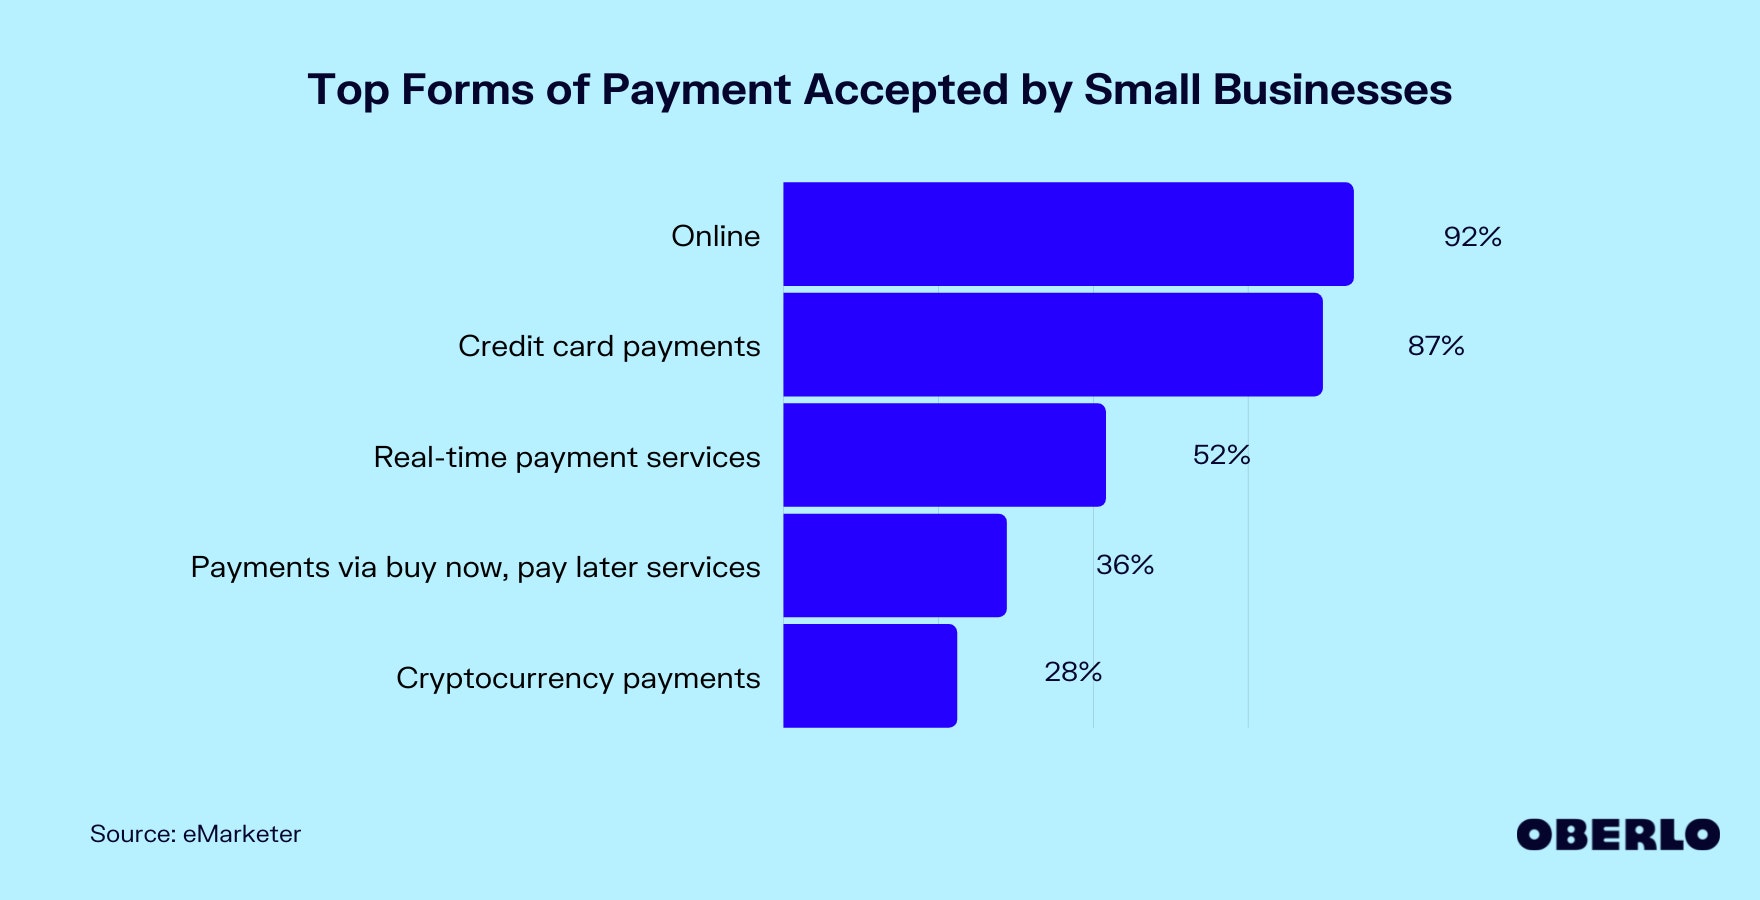 Chart showing the top forms of payment accepted by small businesses